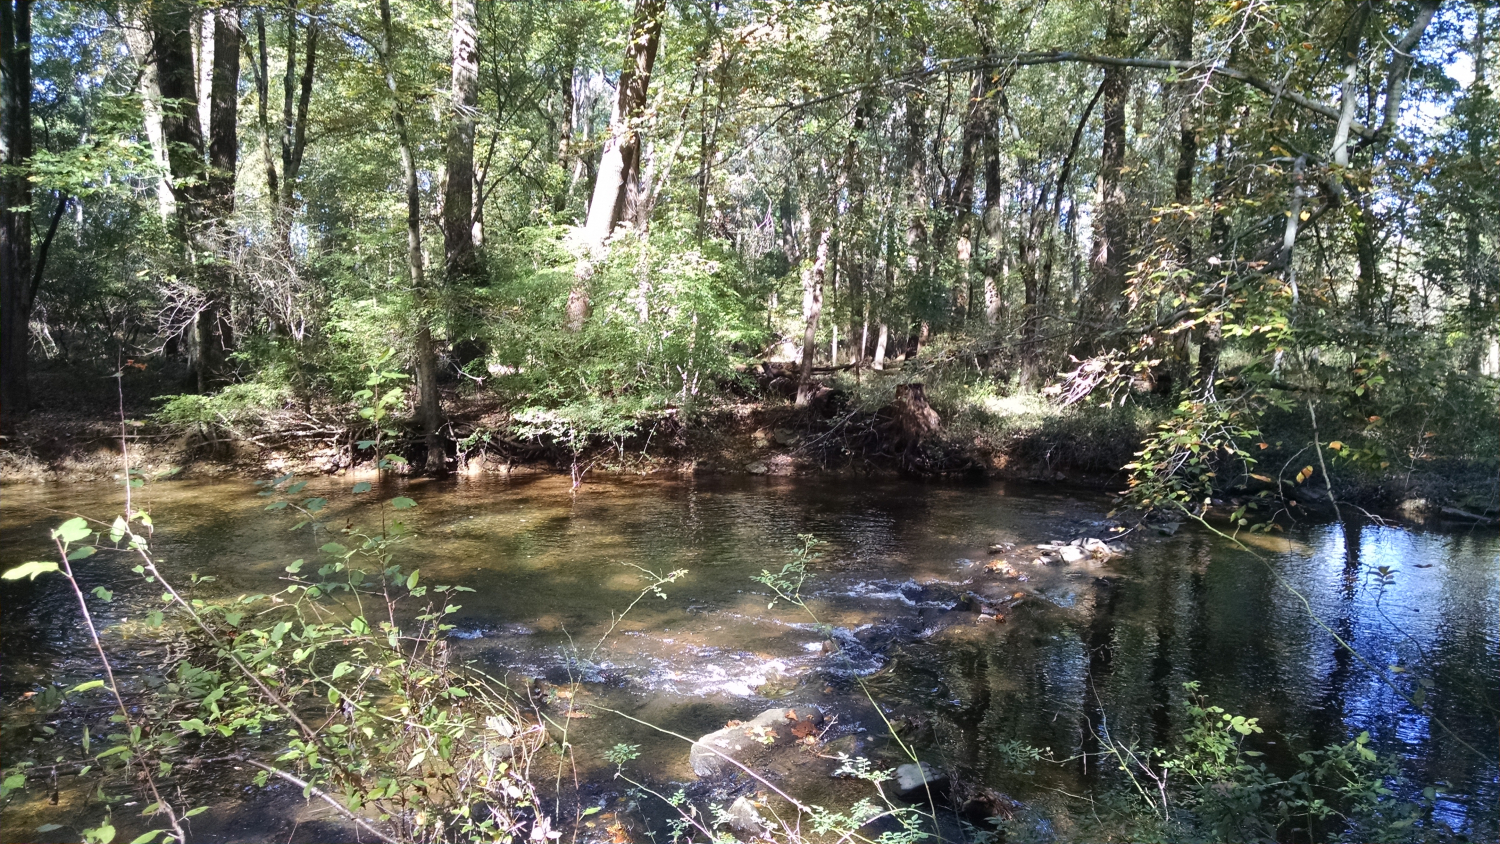 Another view of the newly protected stretch of creek.